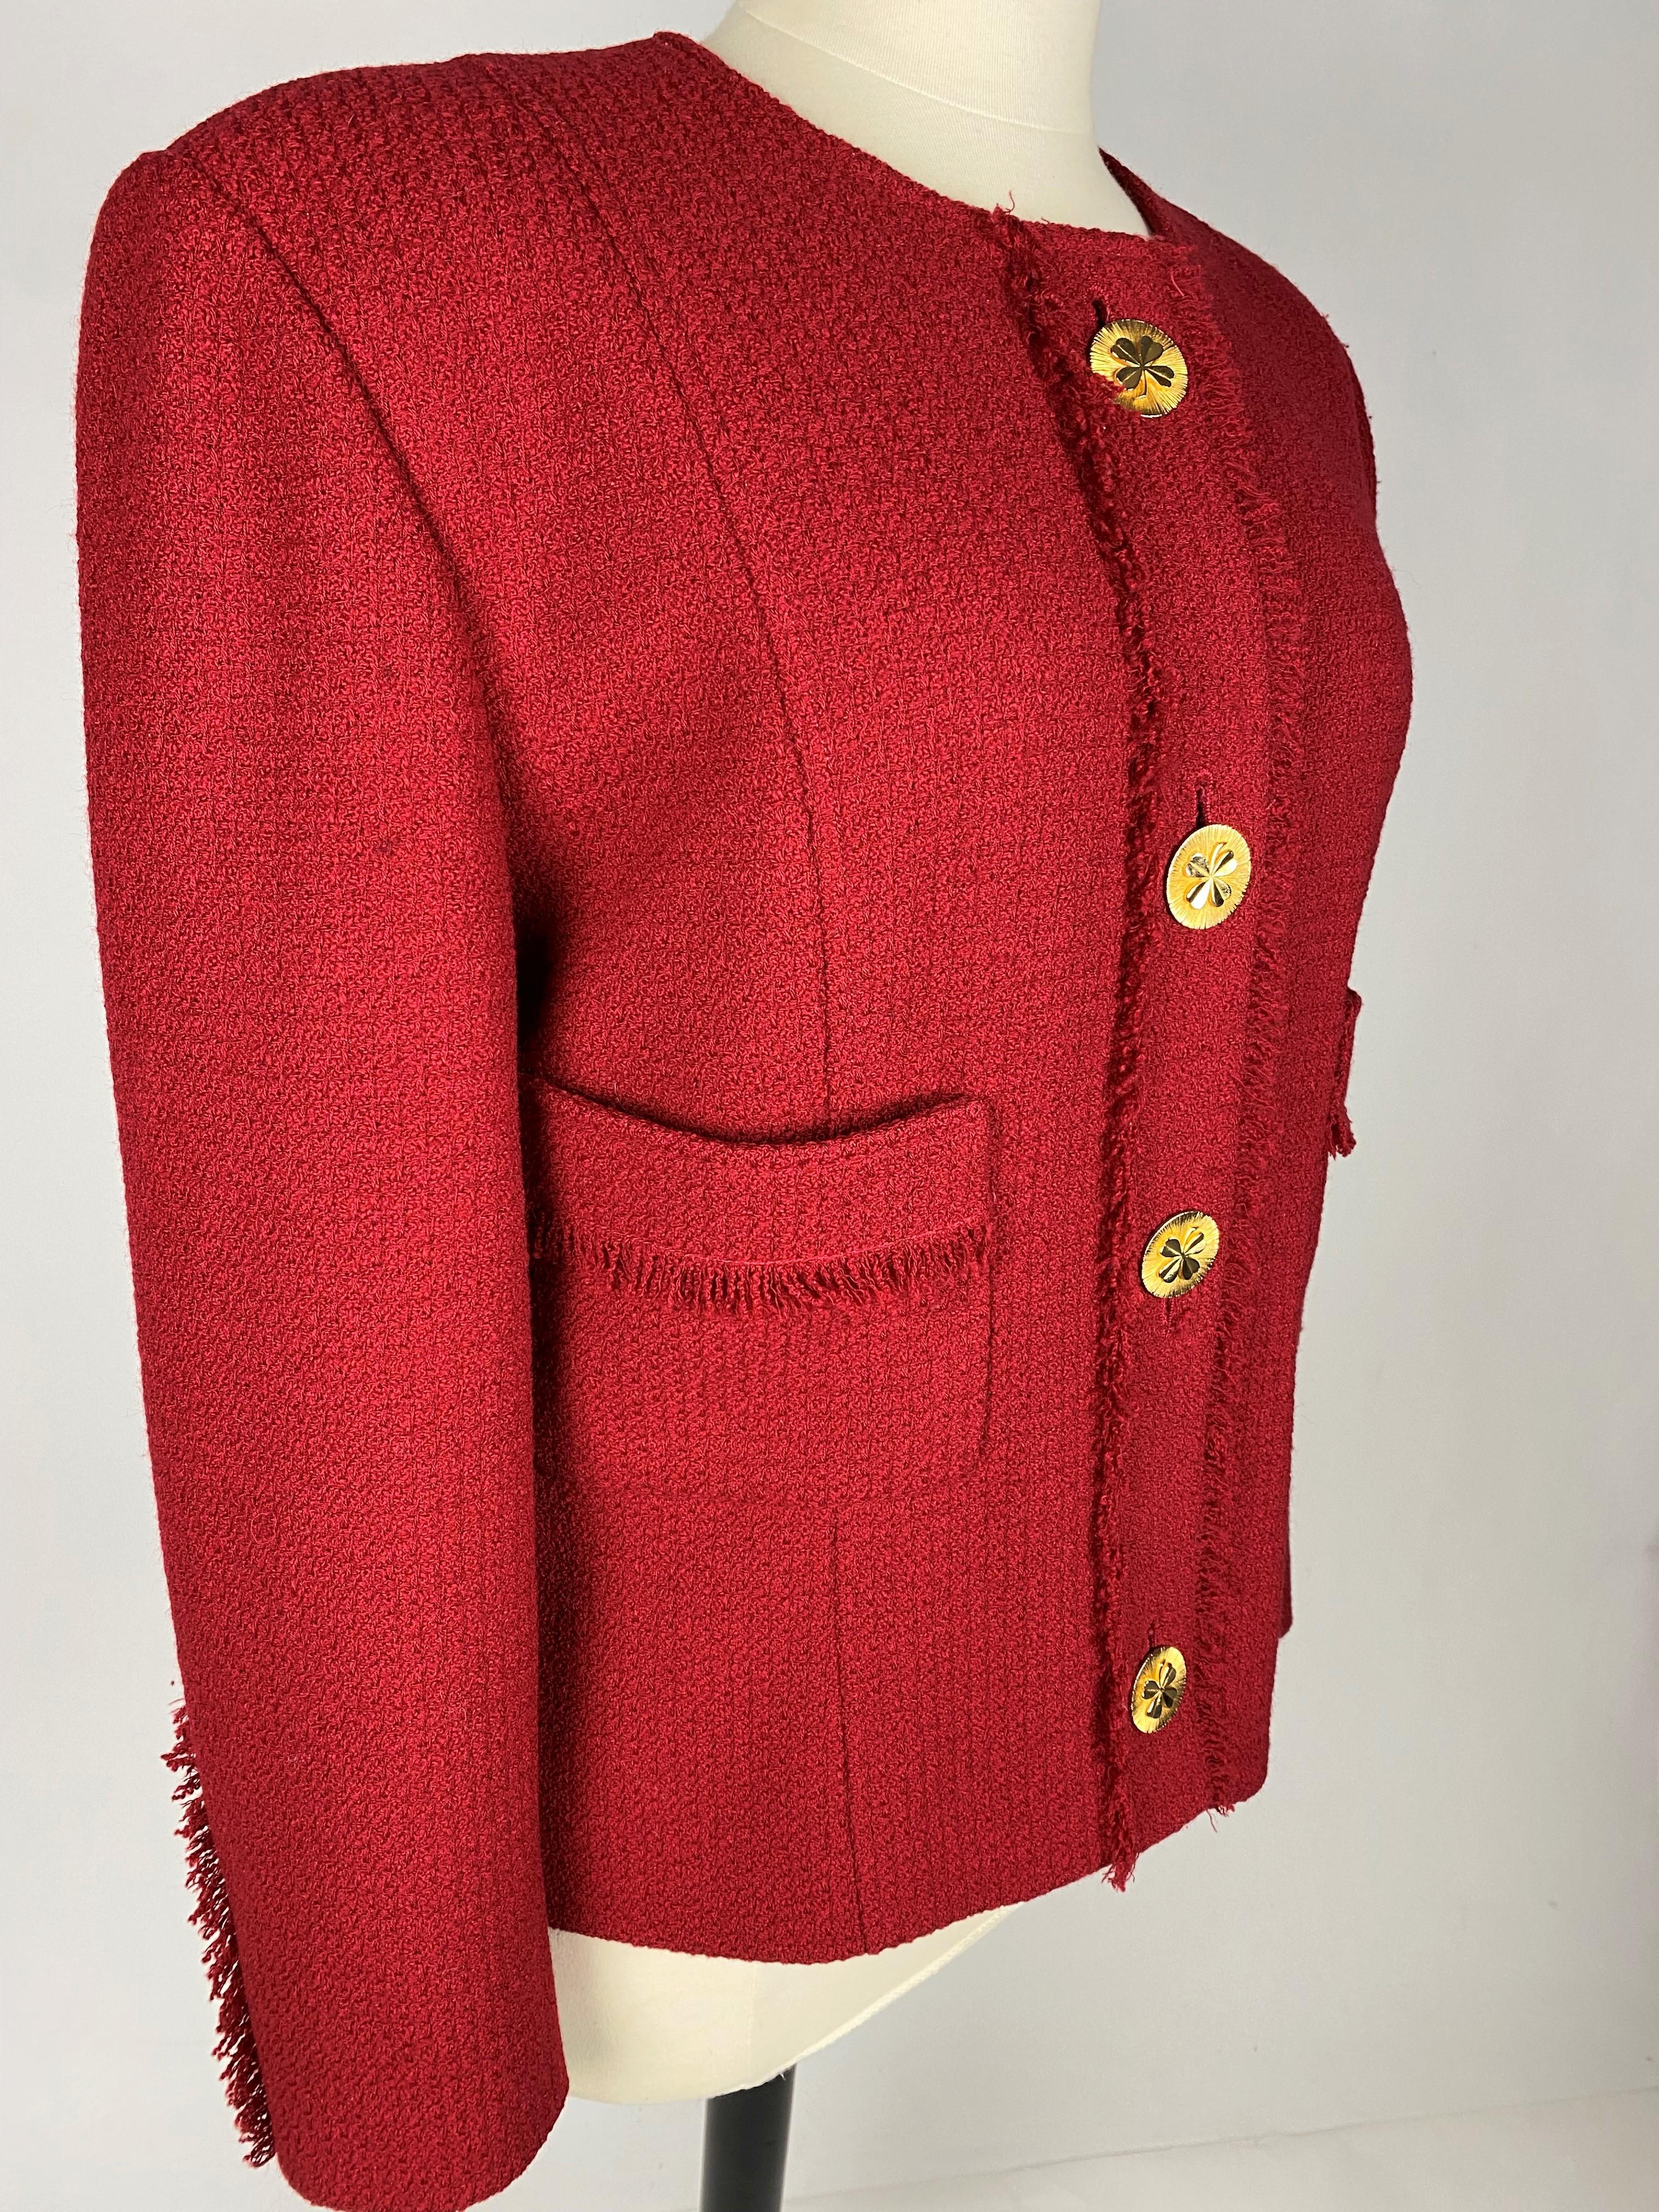 A Chanel - Karl Lagerfeld Red Mohair Wool Jacket Circa 1995-2000 For Sale 2